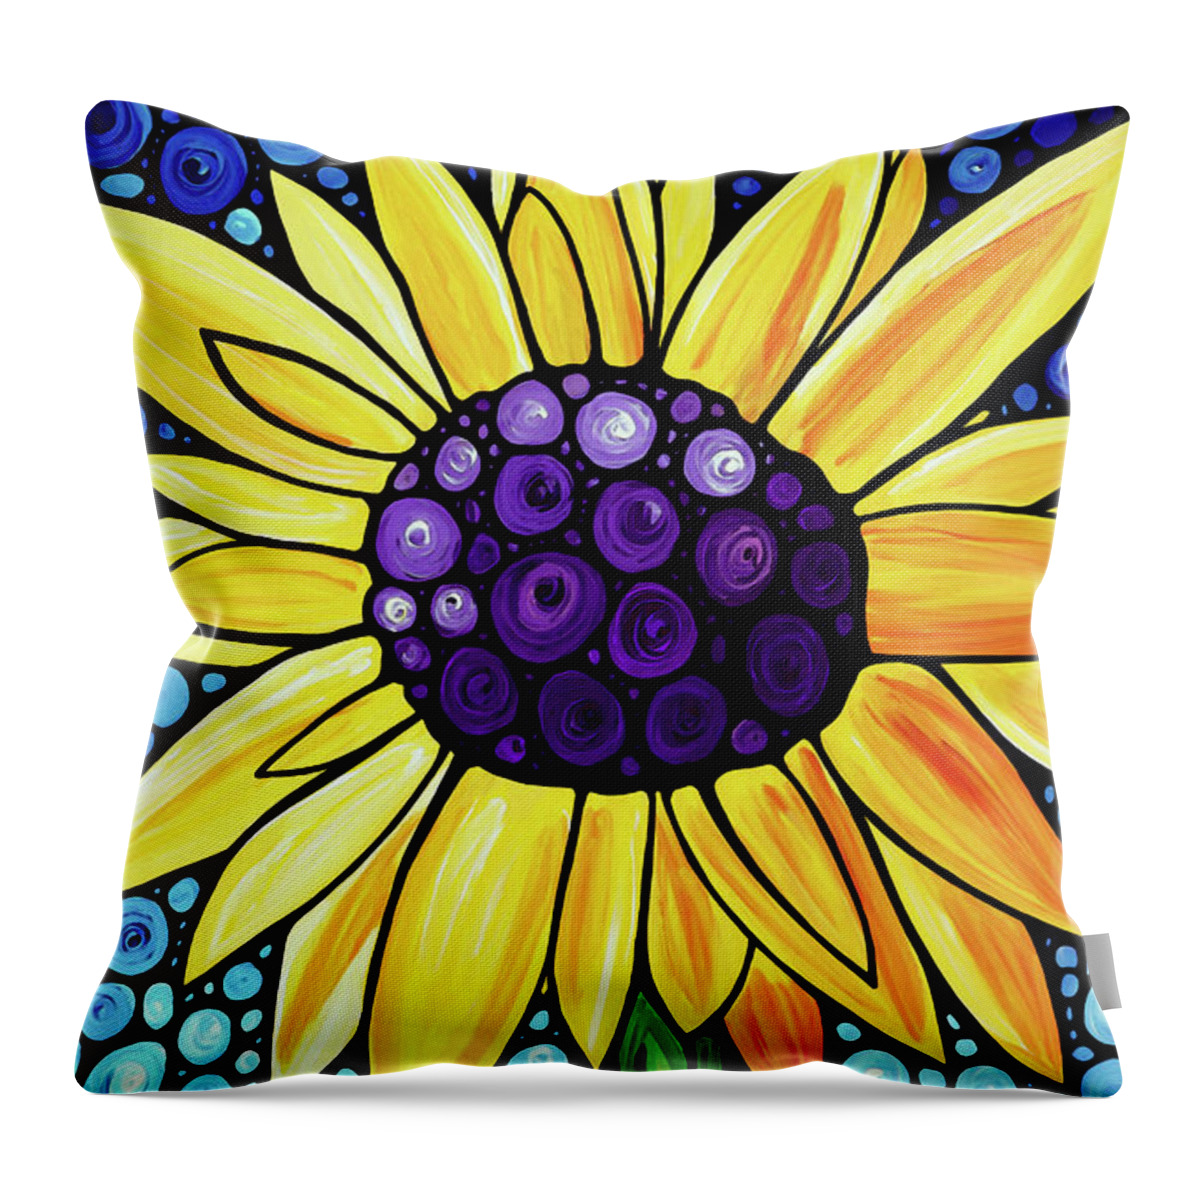 Floral Art Throw Pillow featuring the painting Basking In The Glory by Sharon Cummings